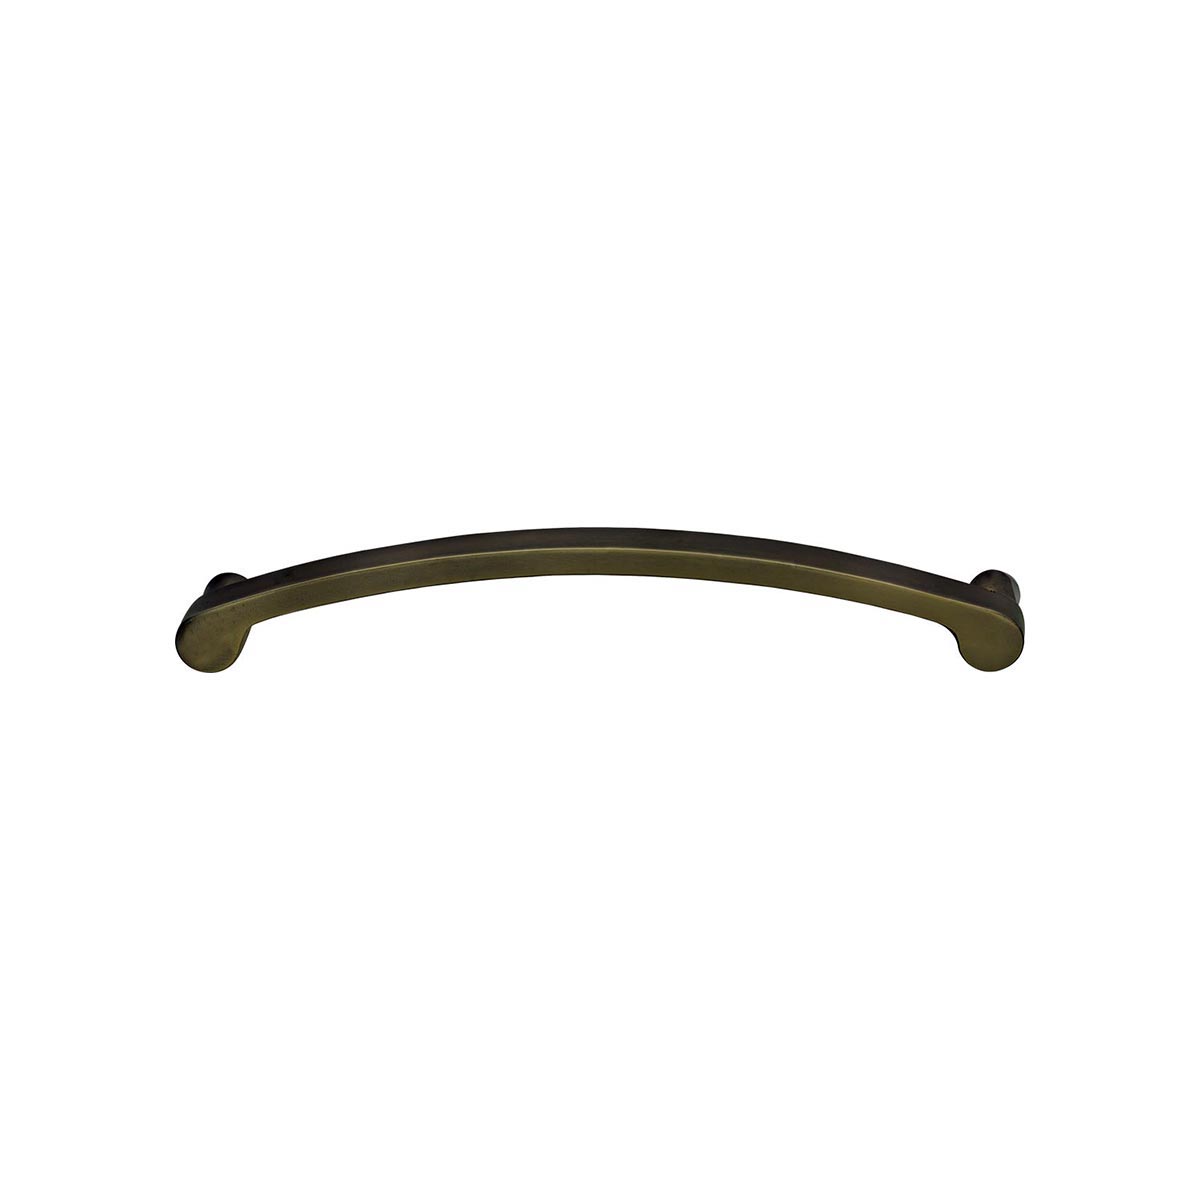 Solid Bronze Soho 8 inch Cabinet Pull